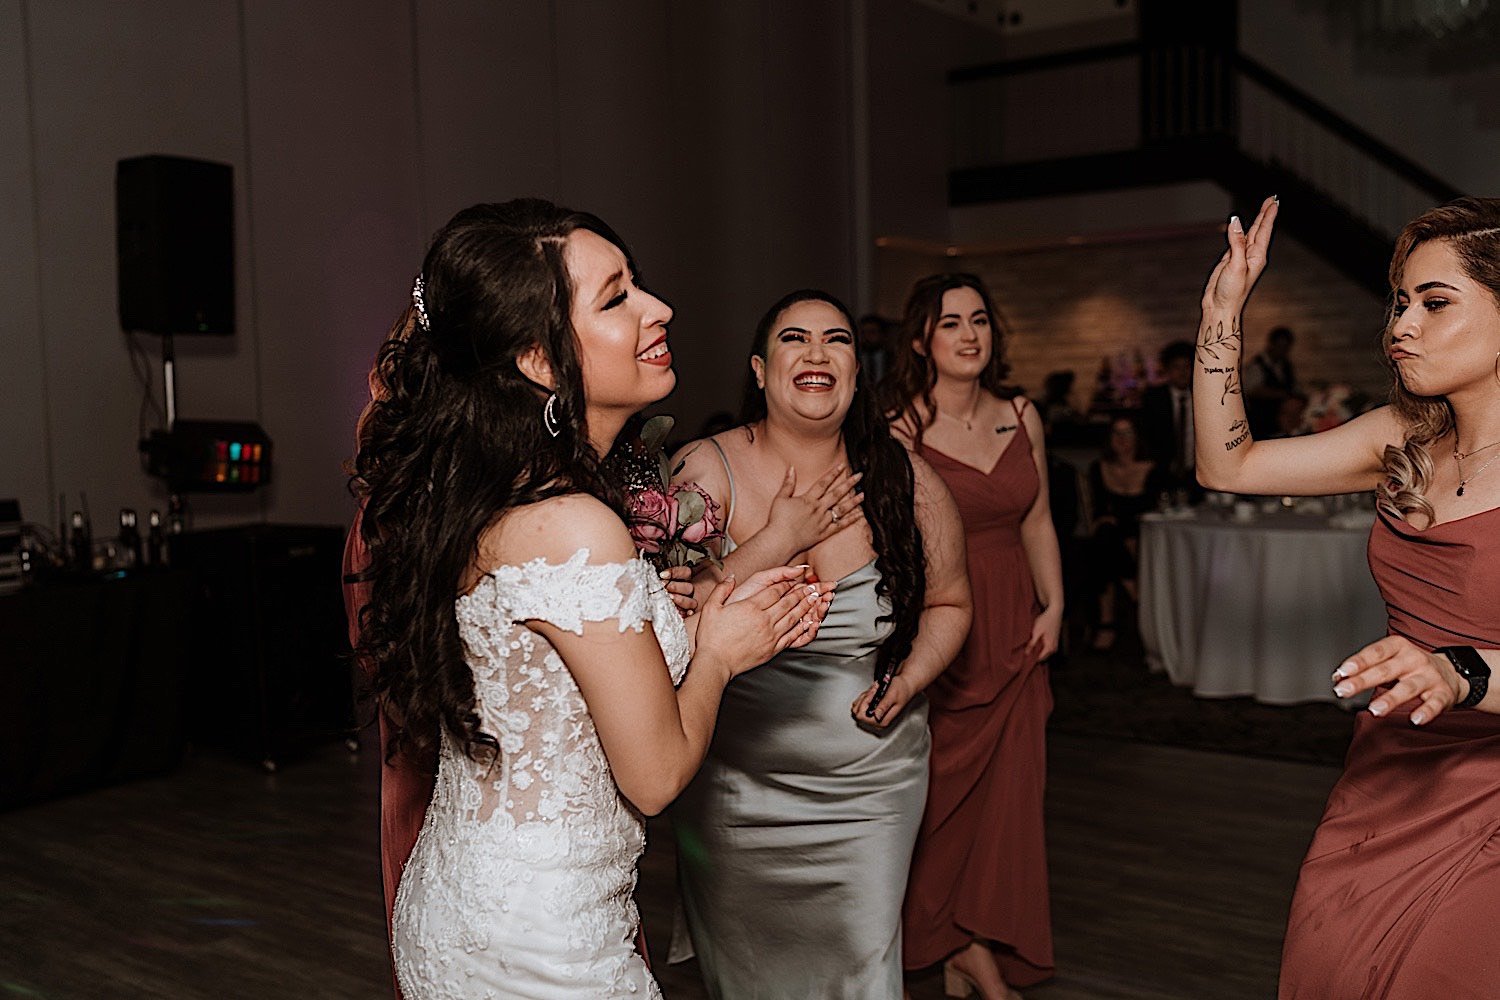 Bride and guests smile and laugh as they dance during Chicagoland ballroom wedding reception